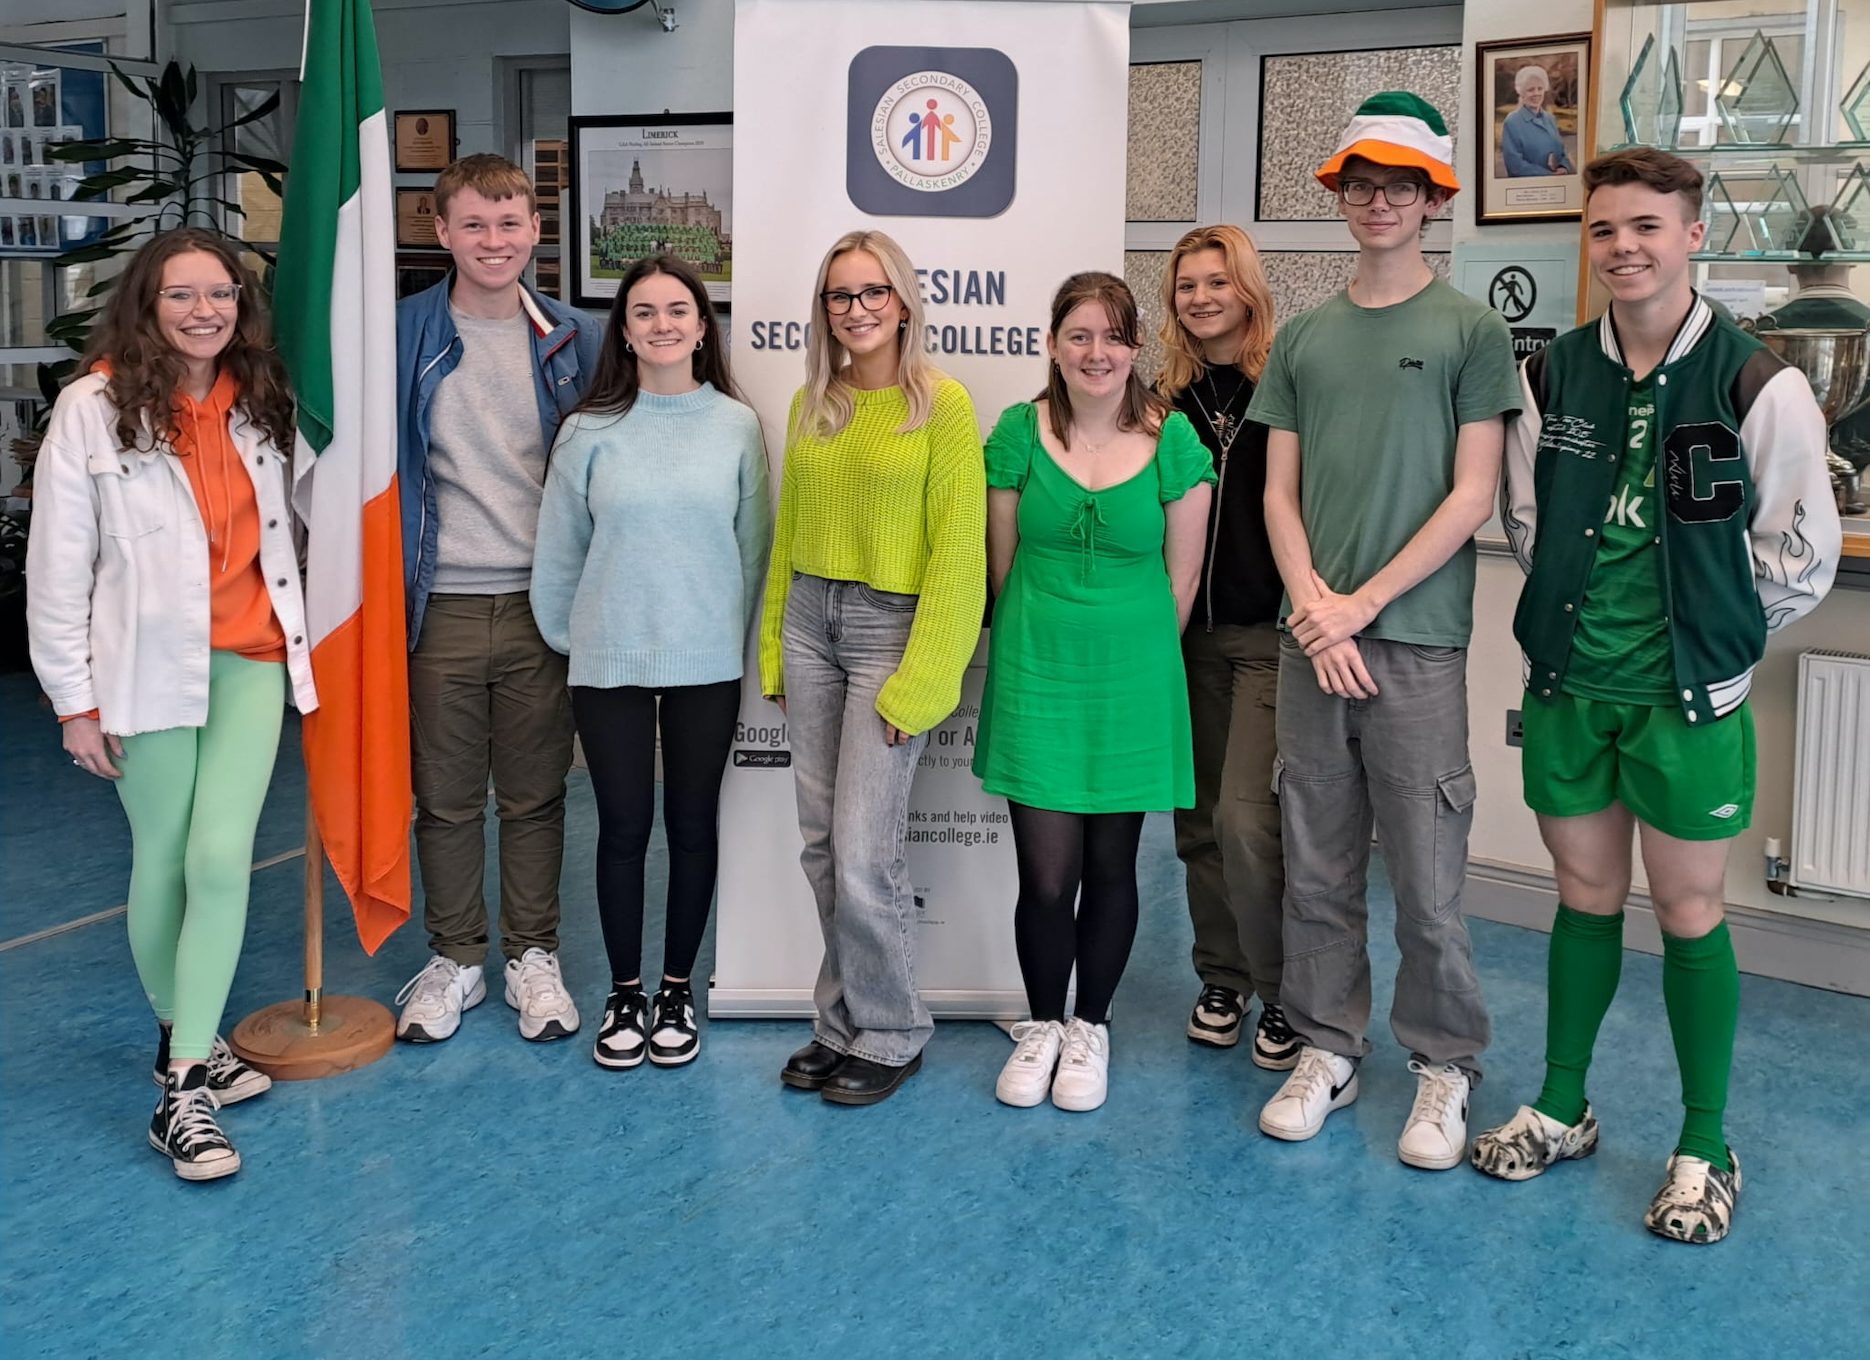 Over €1,000 raised by Limerick Salesian Students in aid of Sarsfield Project